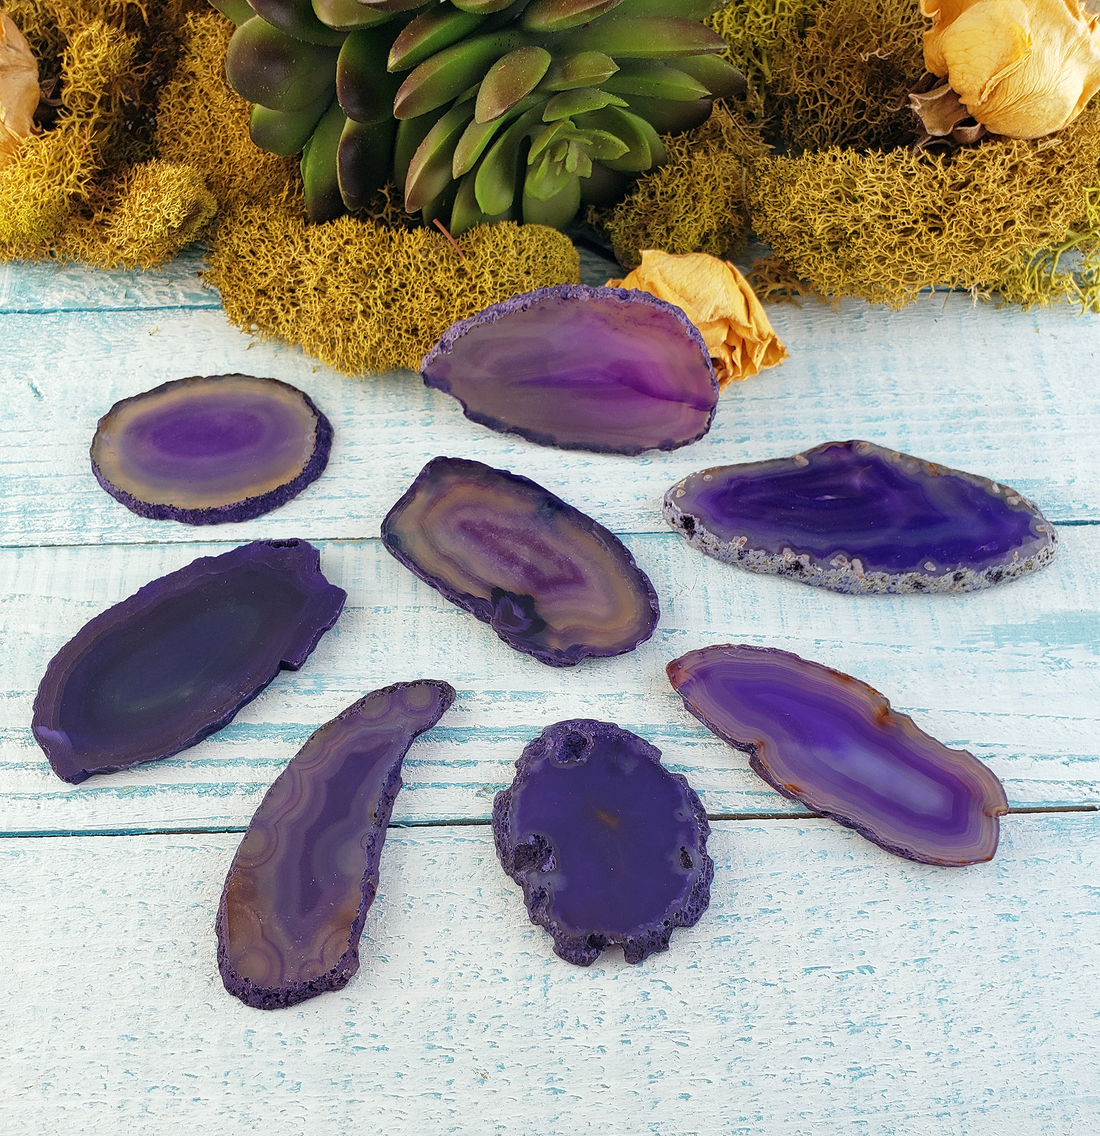 UNDRILLED Dyed Purple Agate Gemstone Slice - Small (1.5" - 3" L x 0.7" - 1" W)